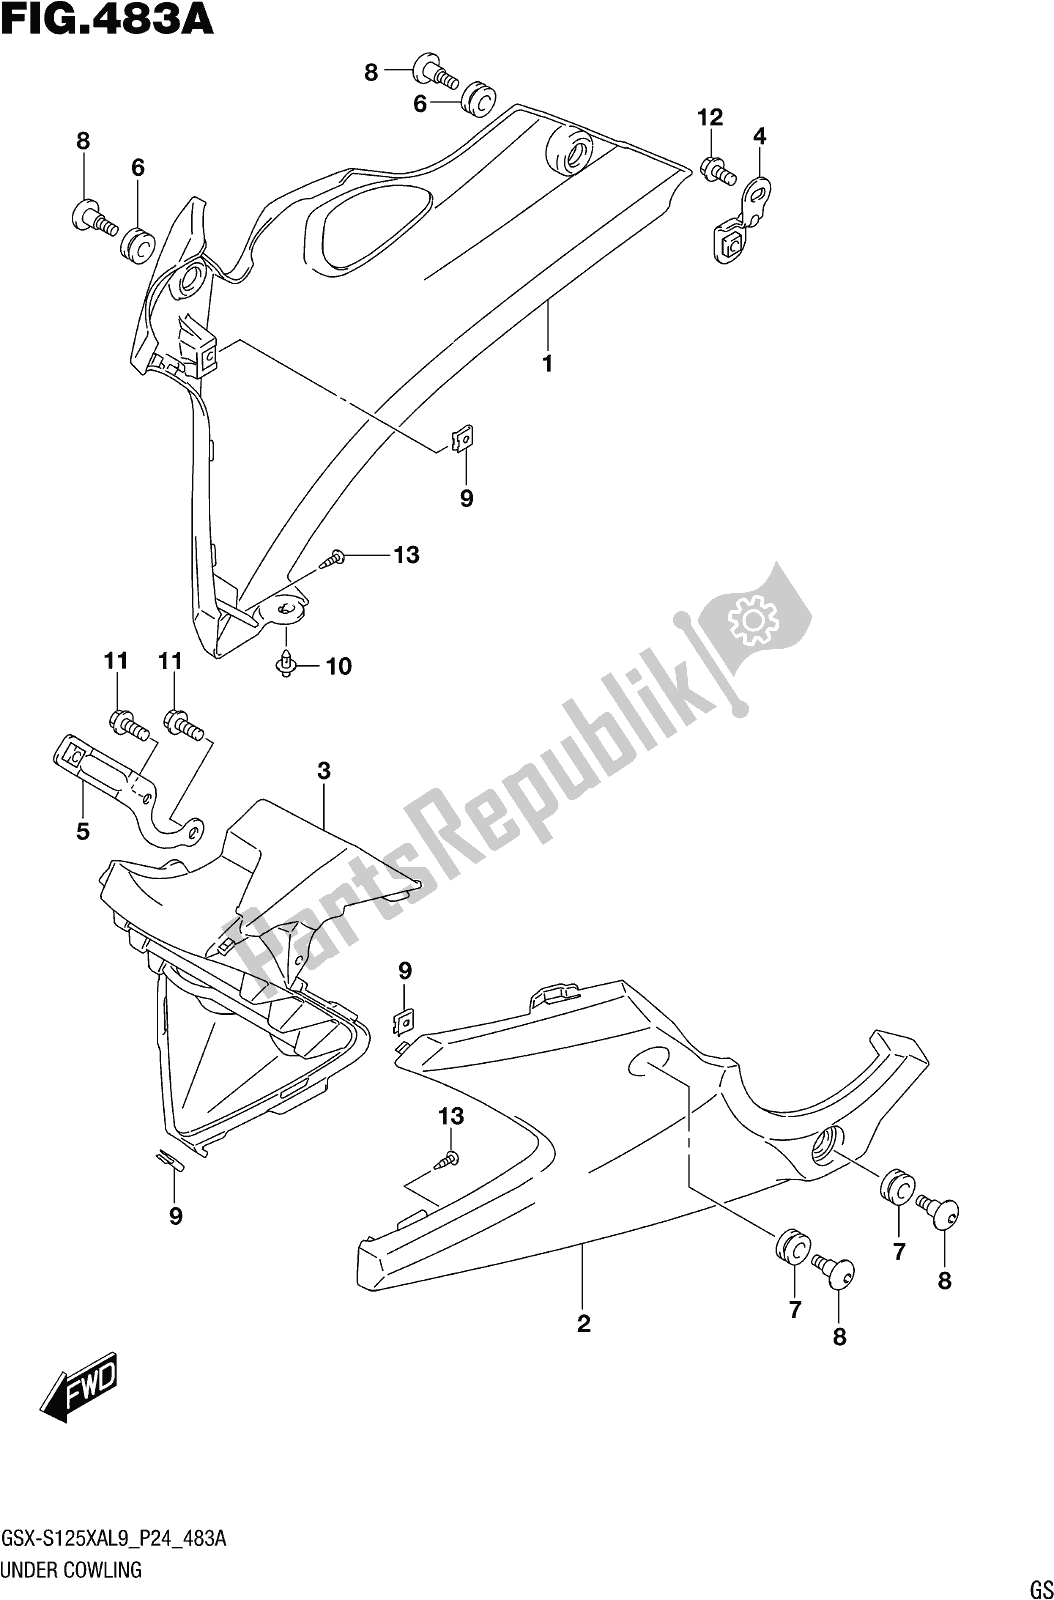 All parts for the Fig. 483a Under Cowling of the Suzuki Gsx-s 125 XA 2019